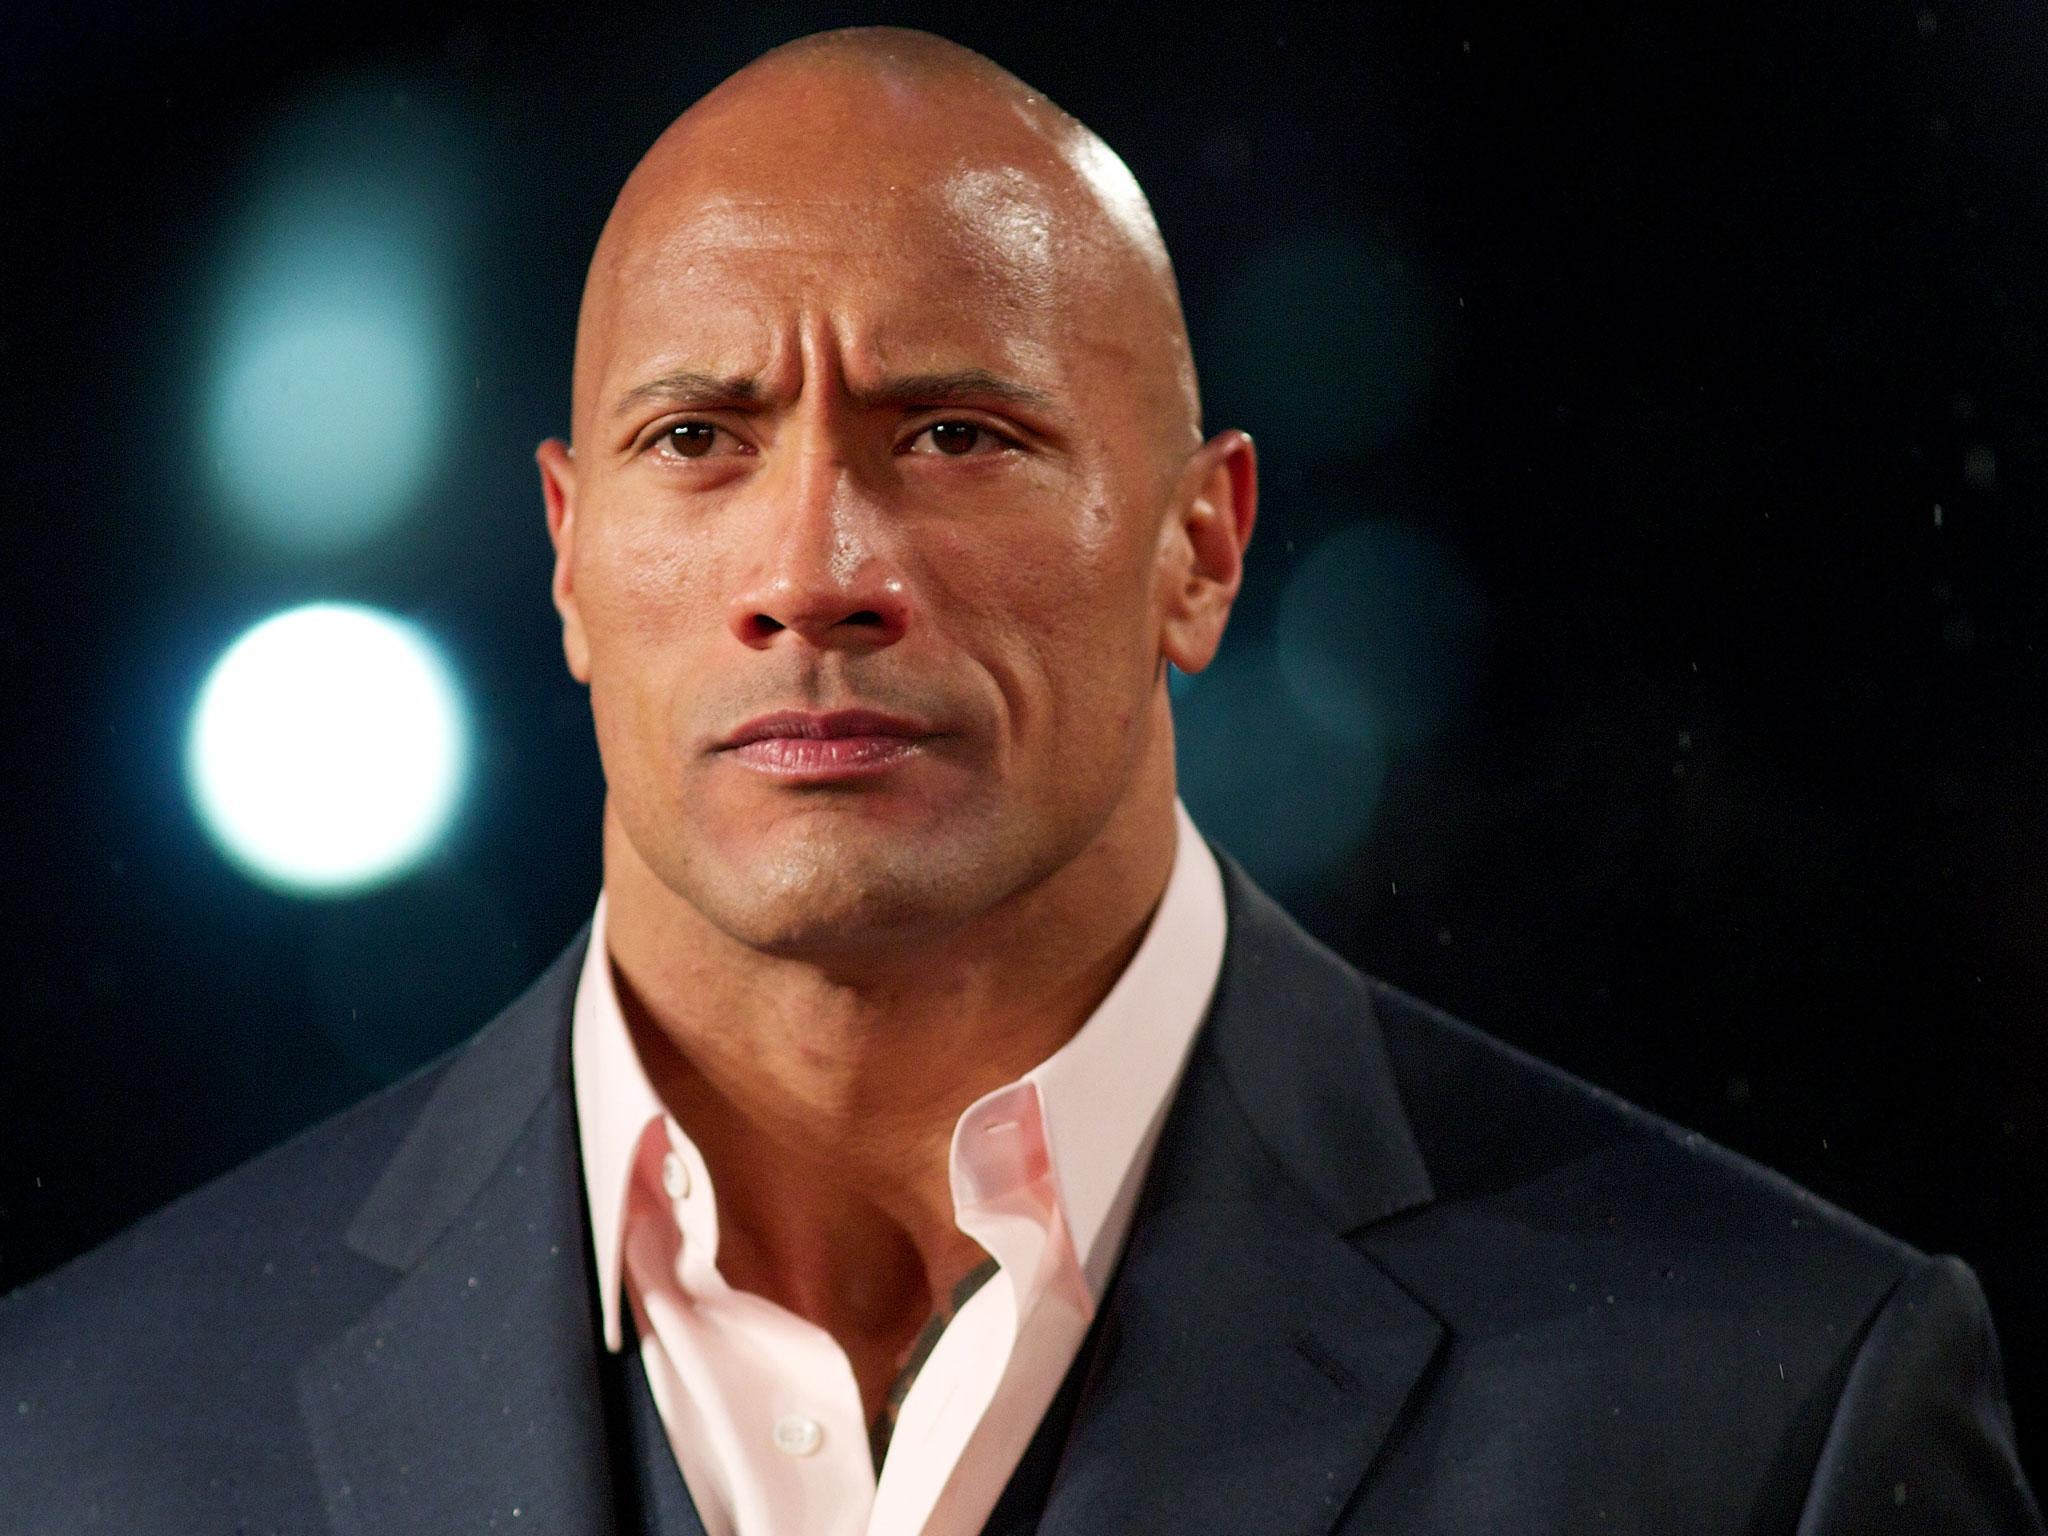 Face it, Dwayne 'The Rock' Johnson is a terrible actor